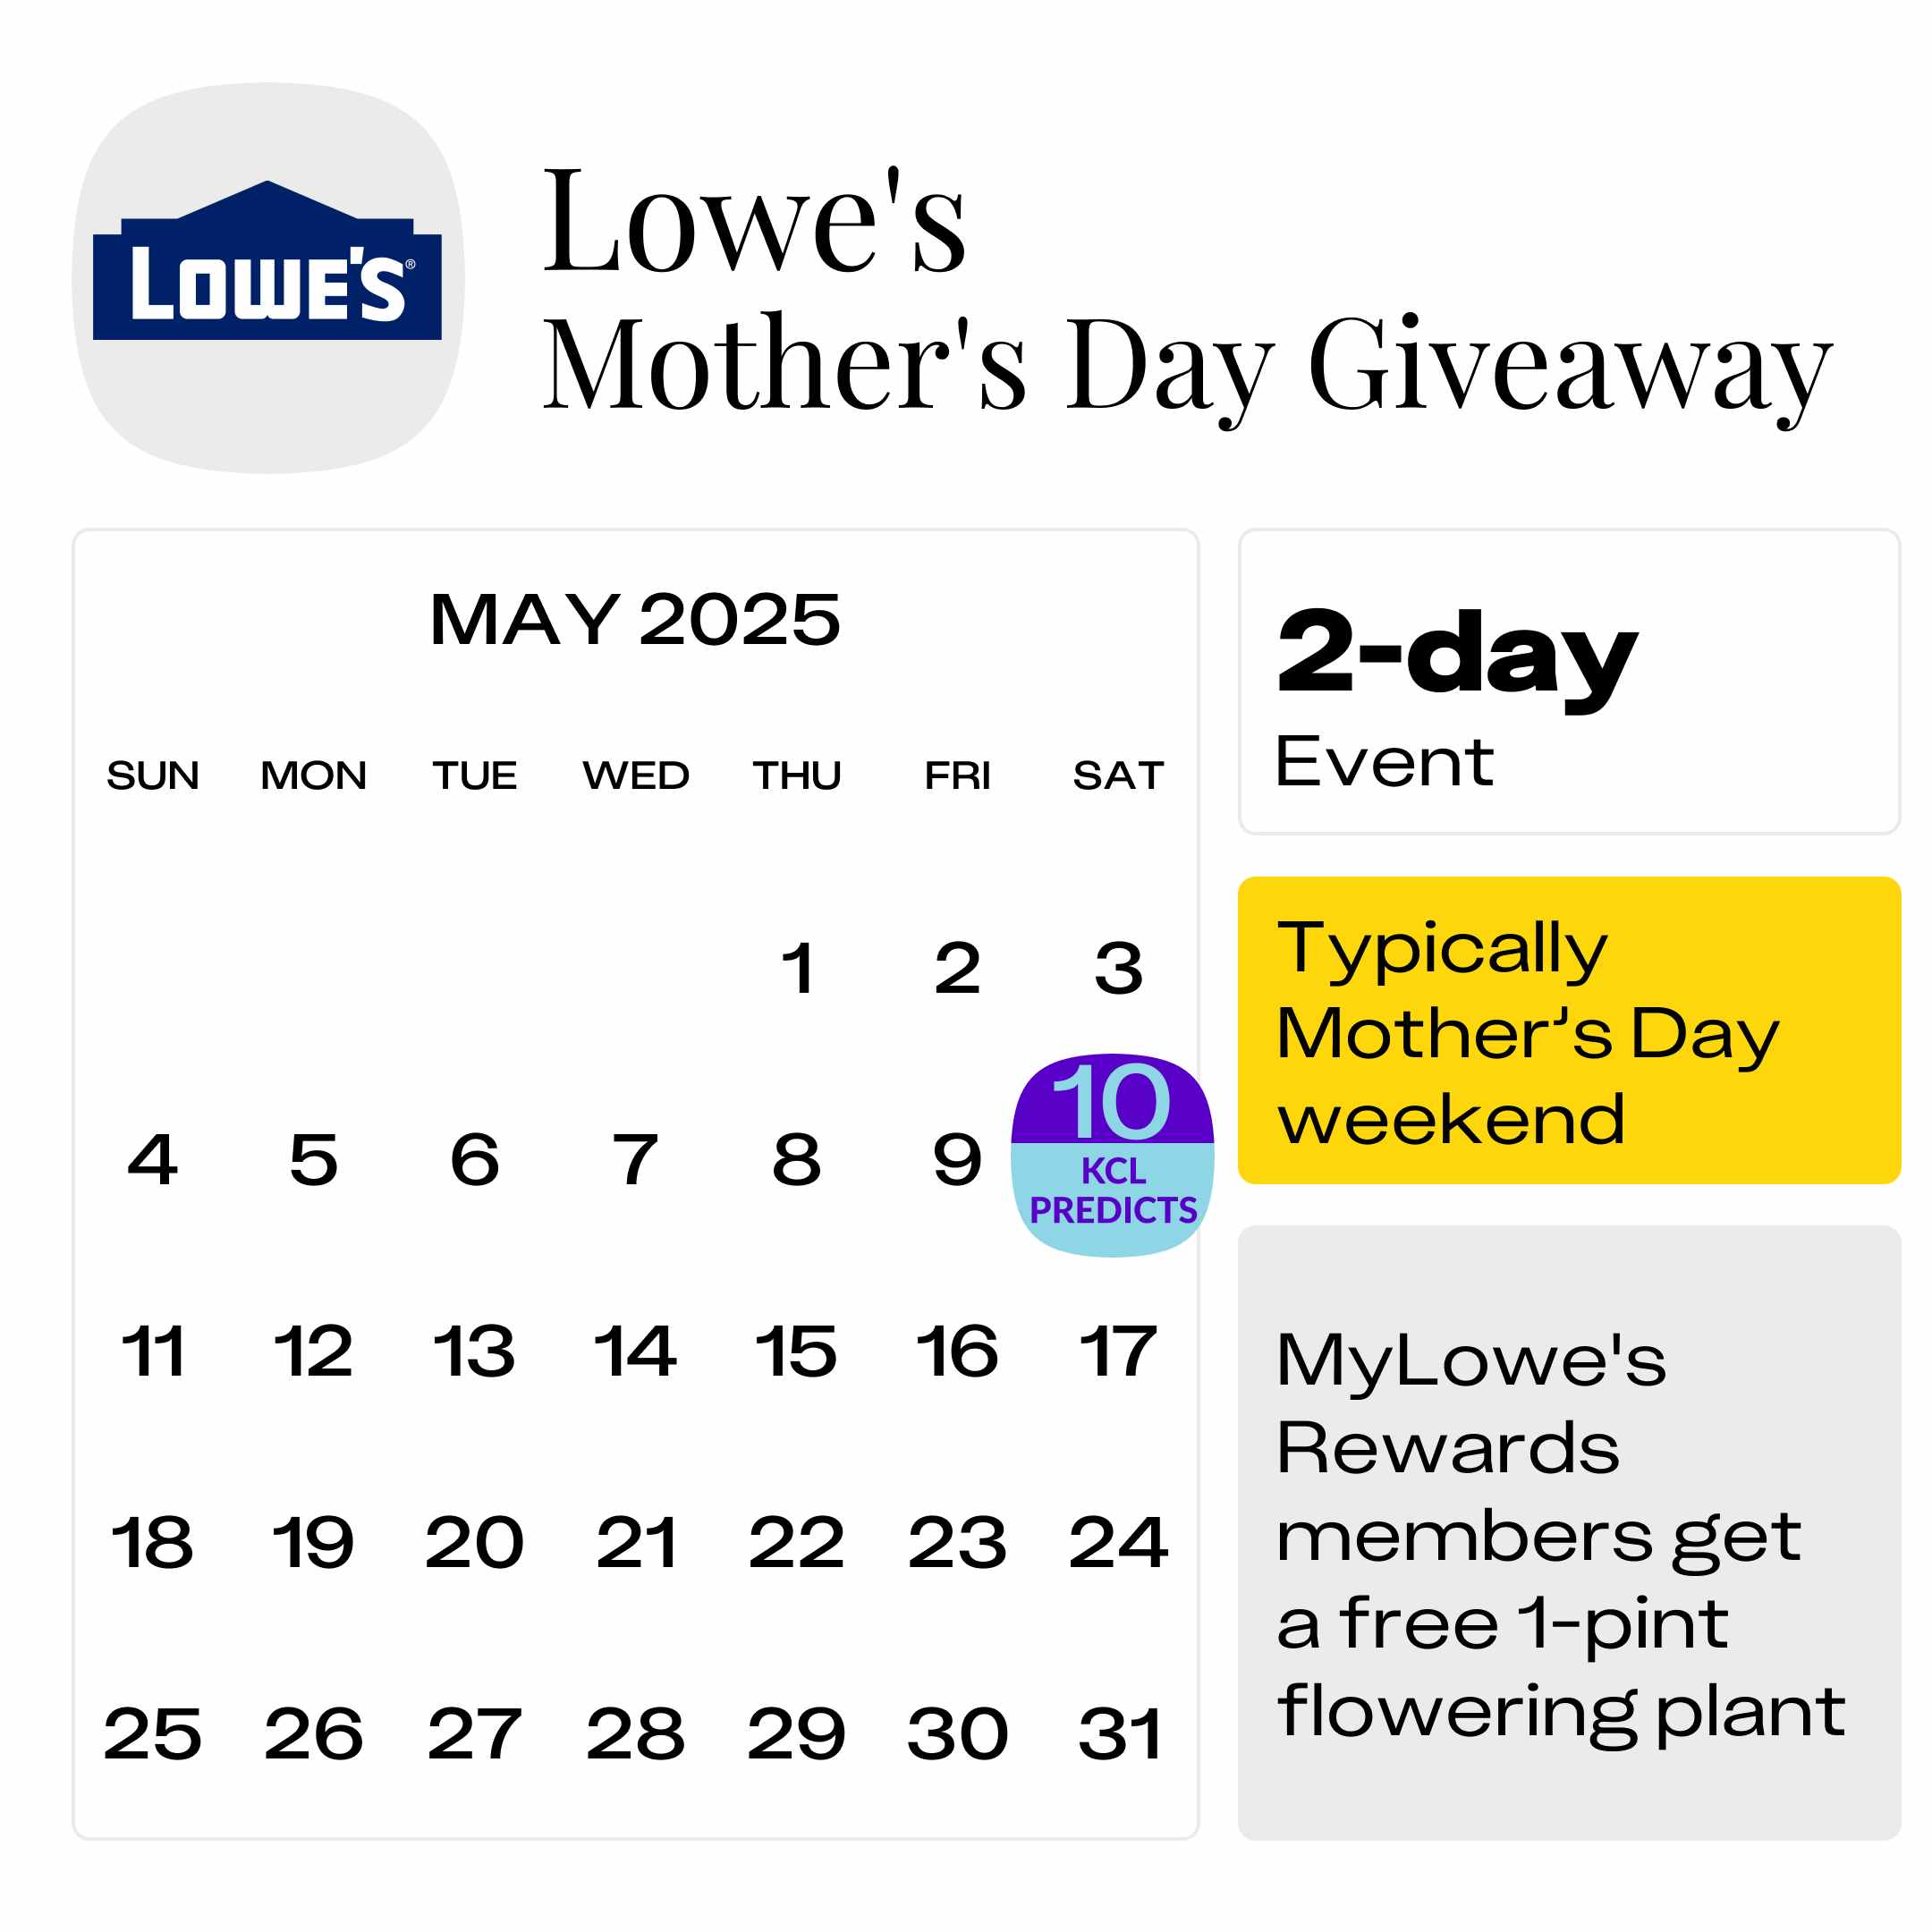 Lowes-Mothers-Day-Giveaway